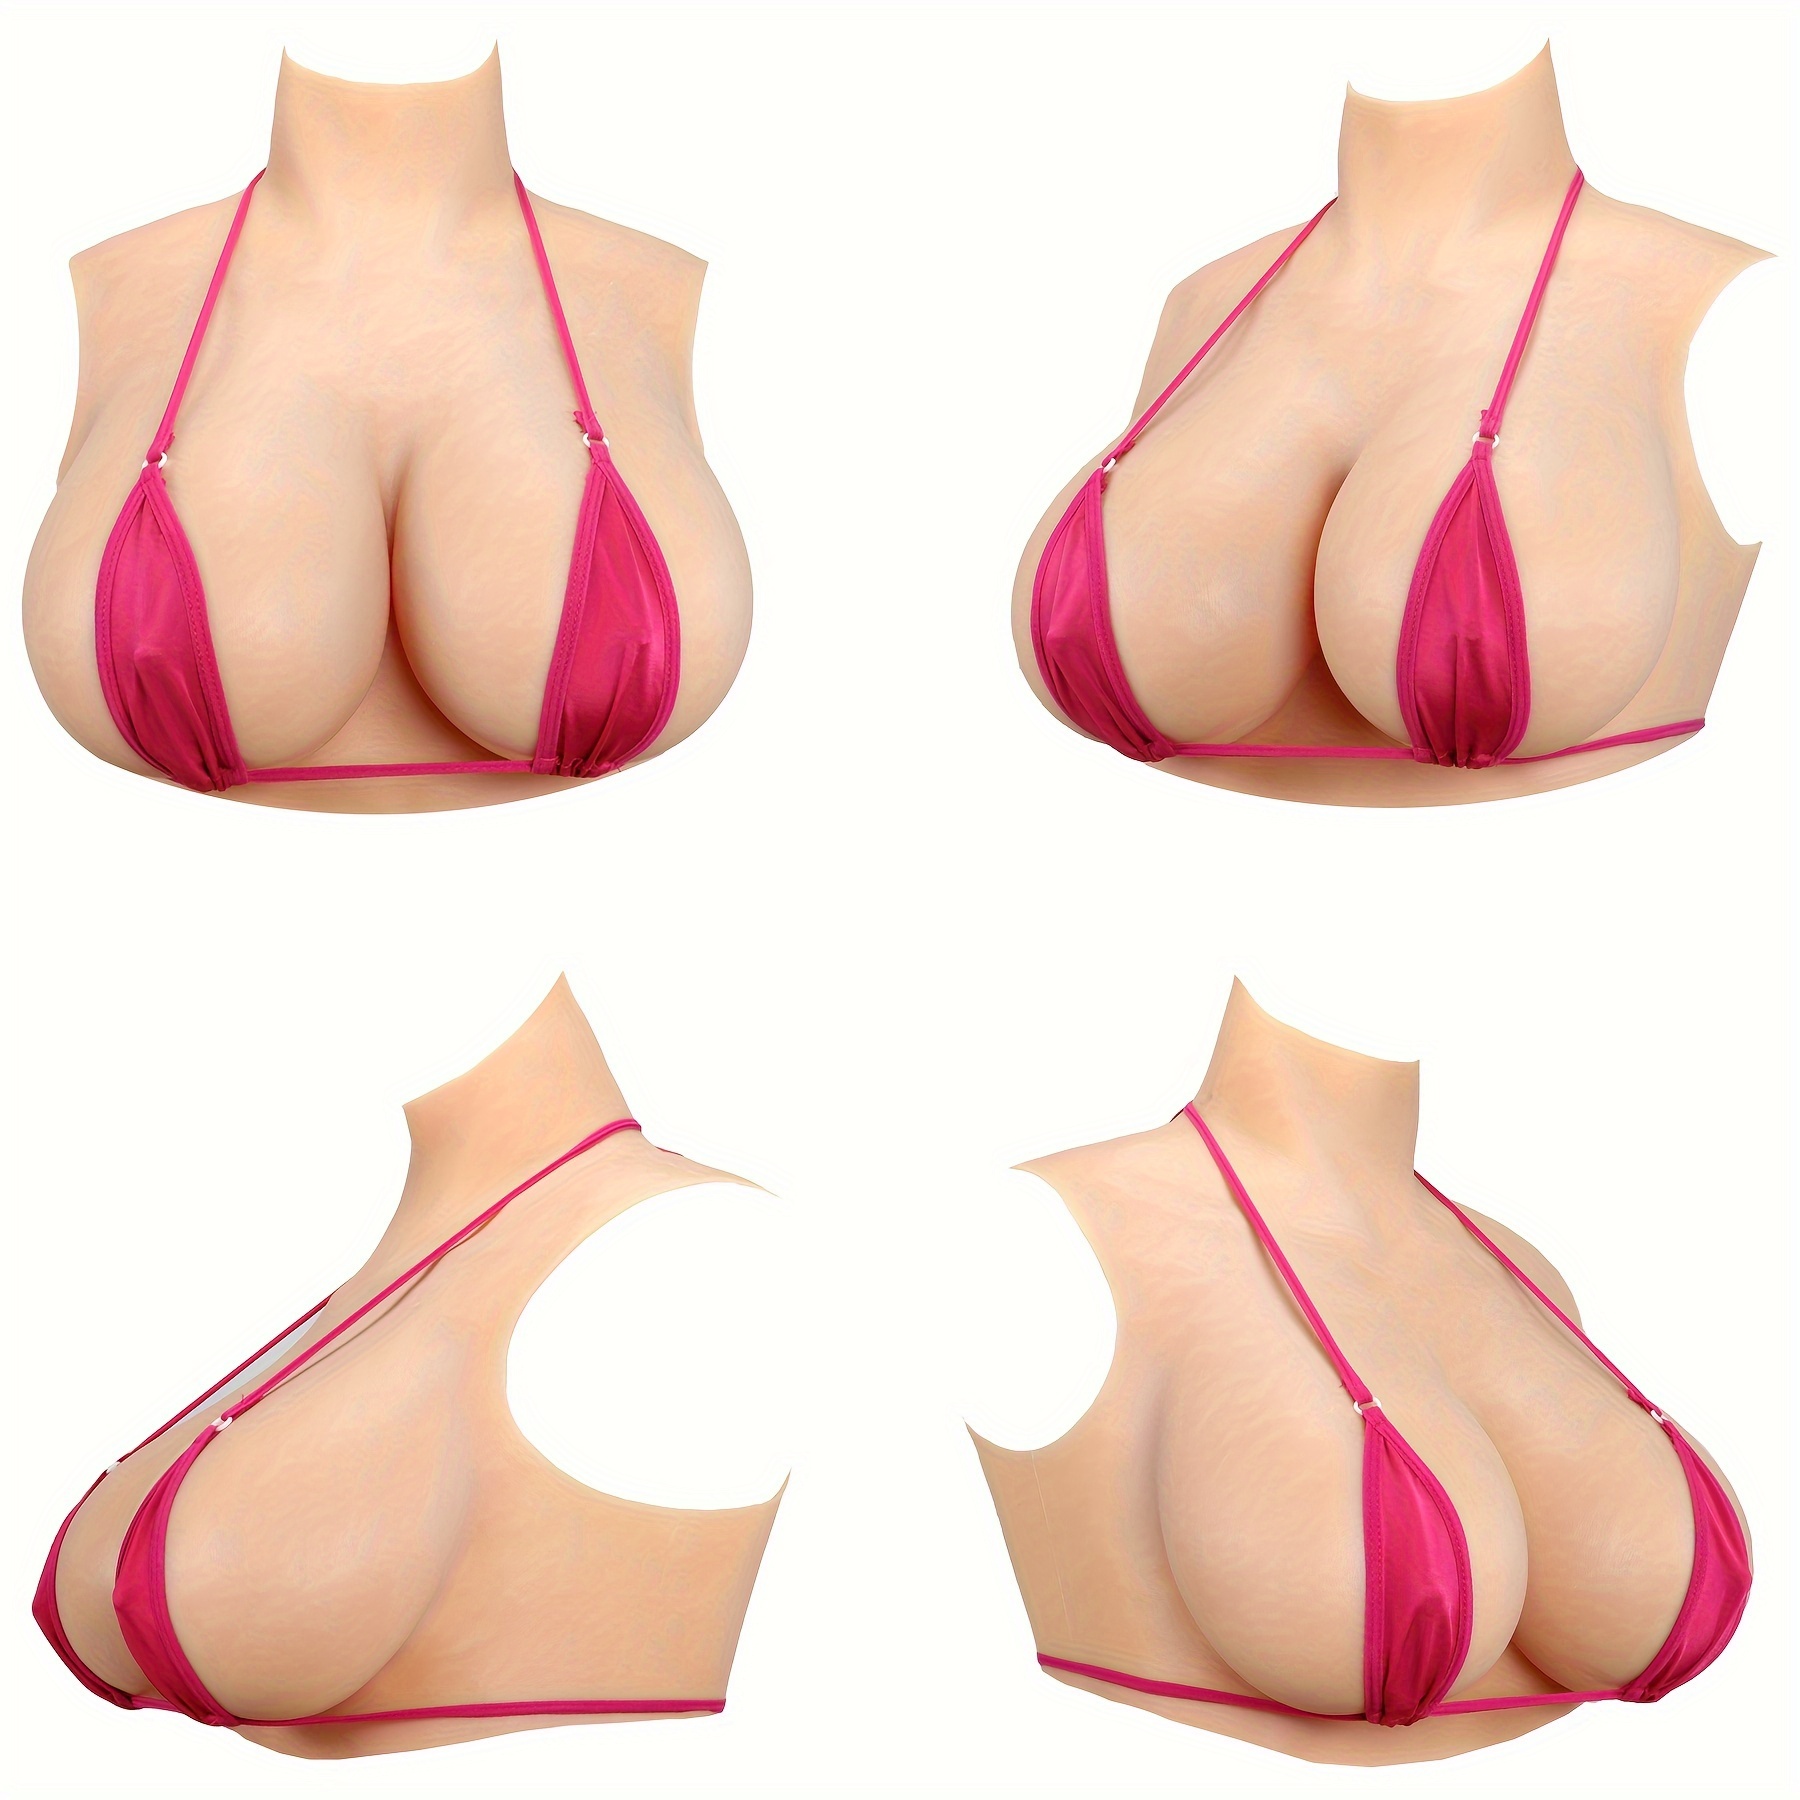 Crossdresser Breast Silicone Filled G Cup Realistic Breast